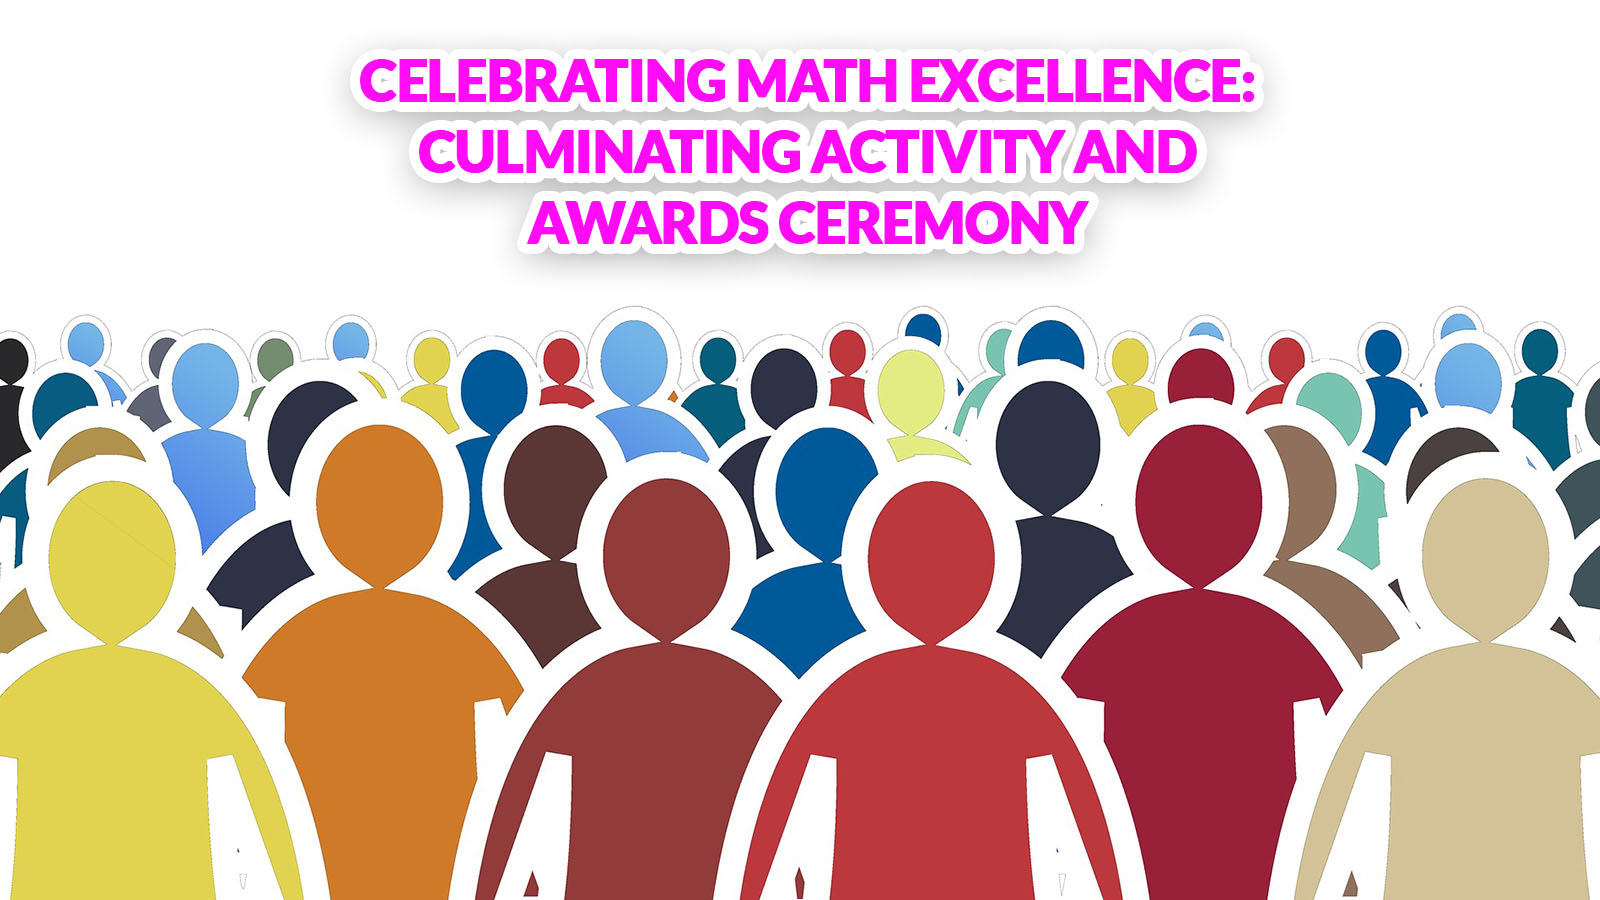 Celebrating Math Excellence: Culminating Activity and Awards Ceremony